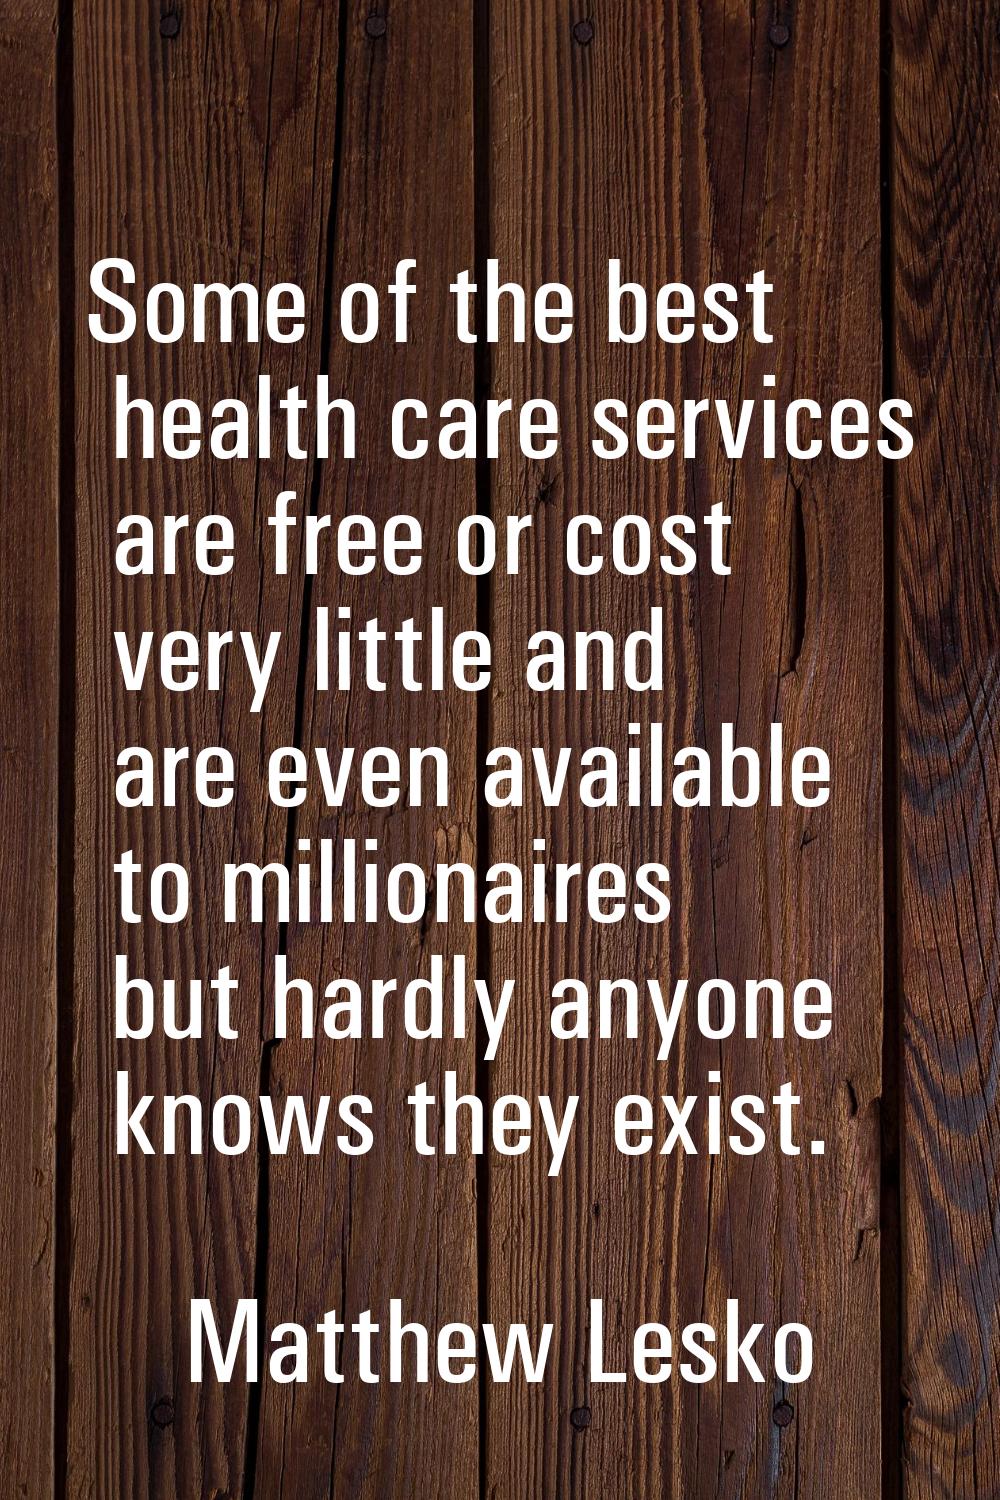 Some of the best health care services are free or cost very little and are even available to millio